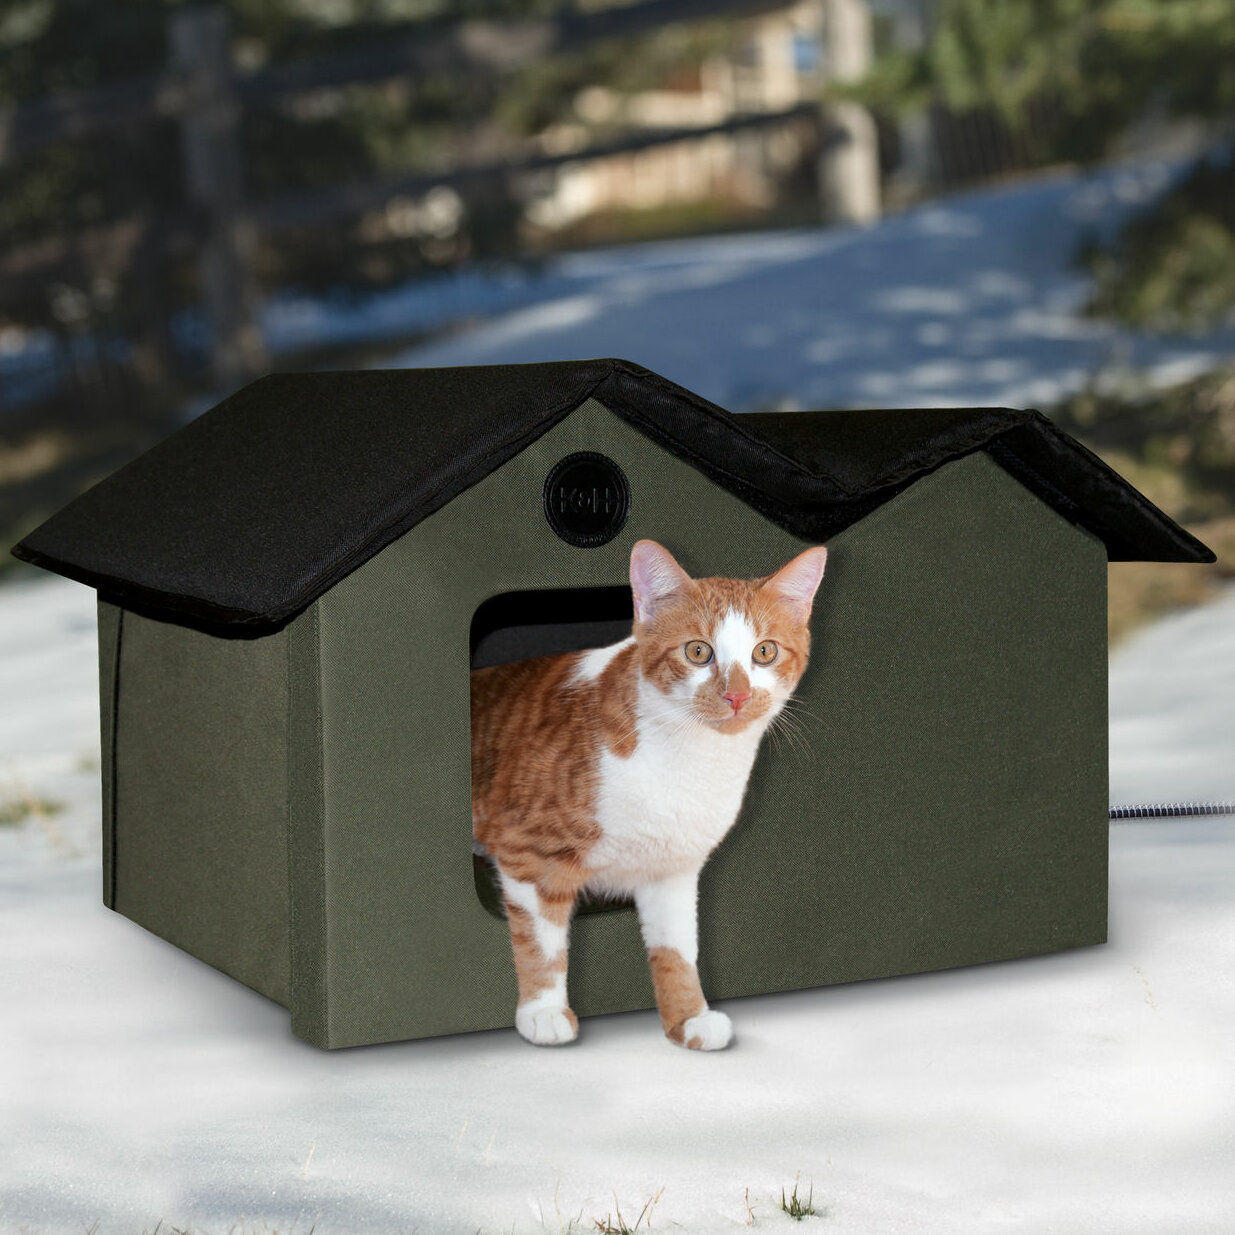 heated outdoor cat house